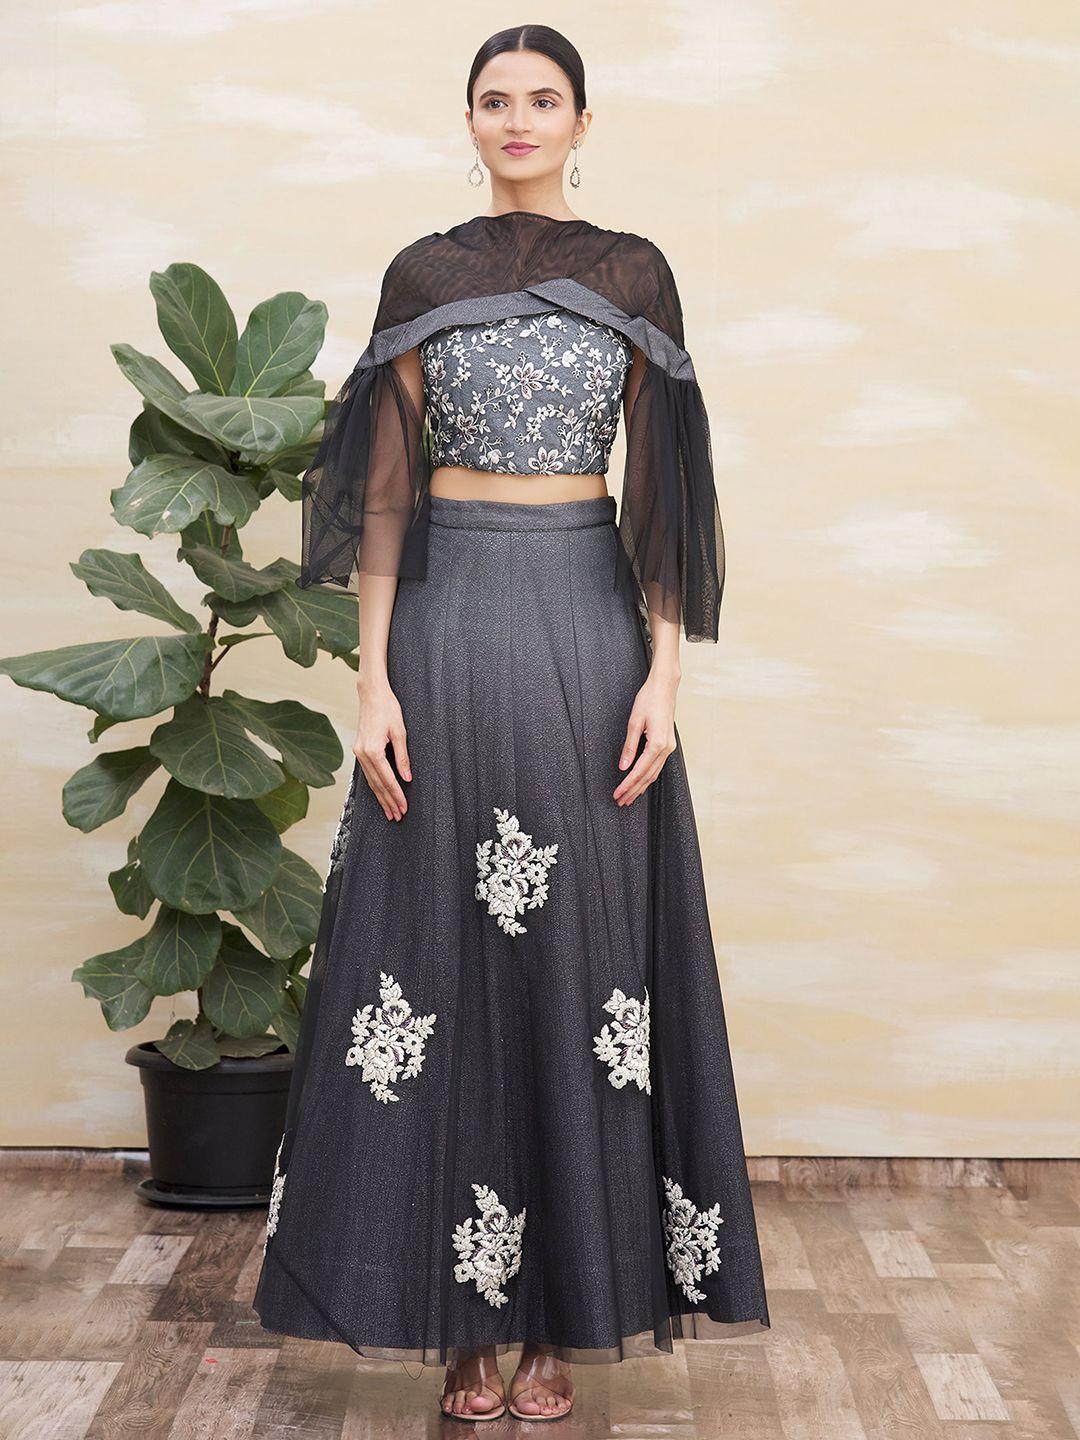 Sangria Floral Embroidered Boat Neck Ready to Wear Lehenga Choli